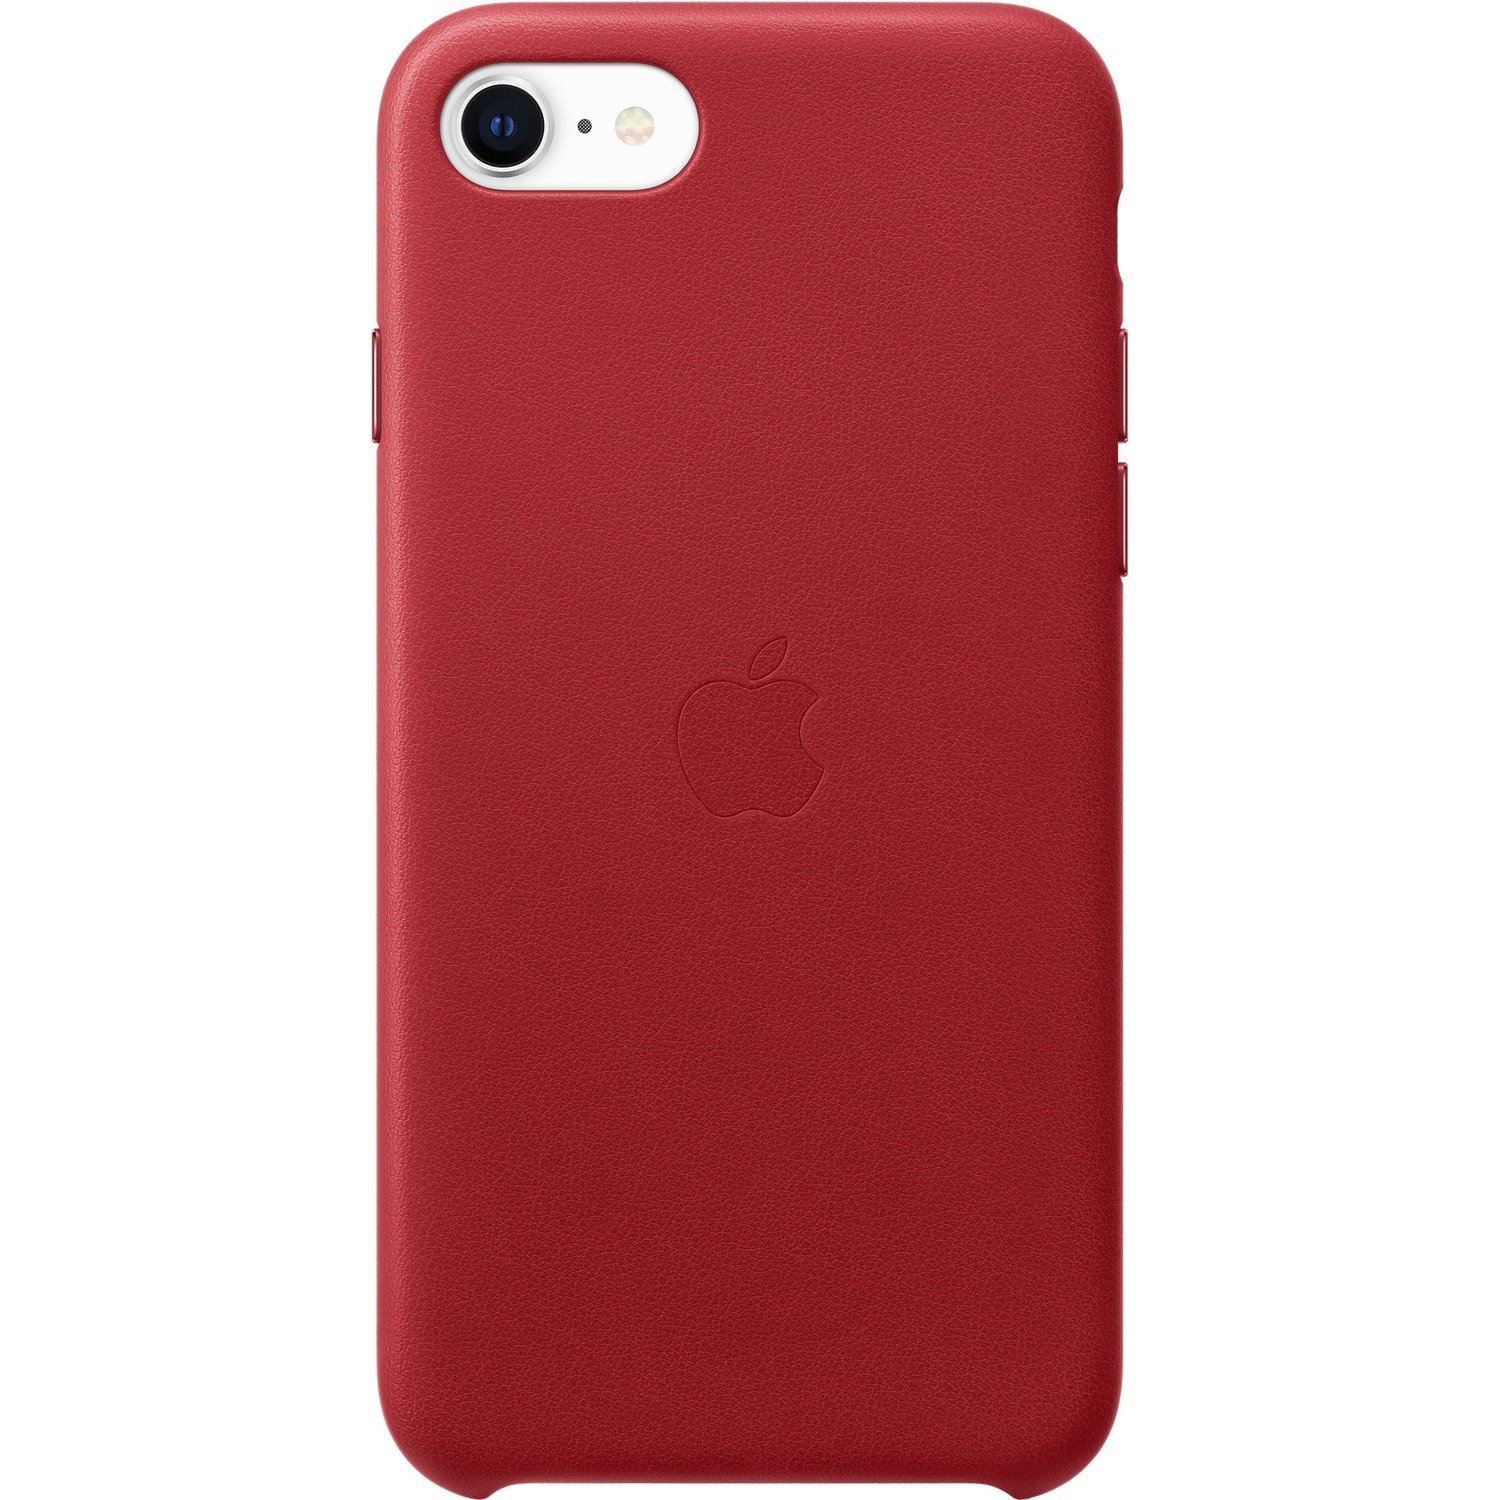 Apple iPhone SE Leather Case - (PRODUCT)RED